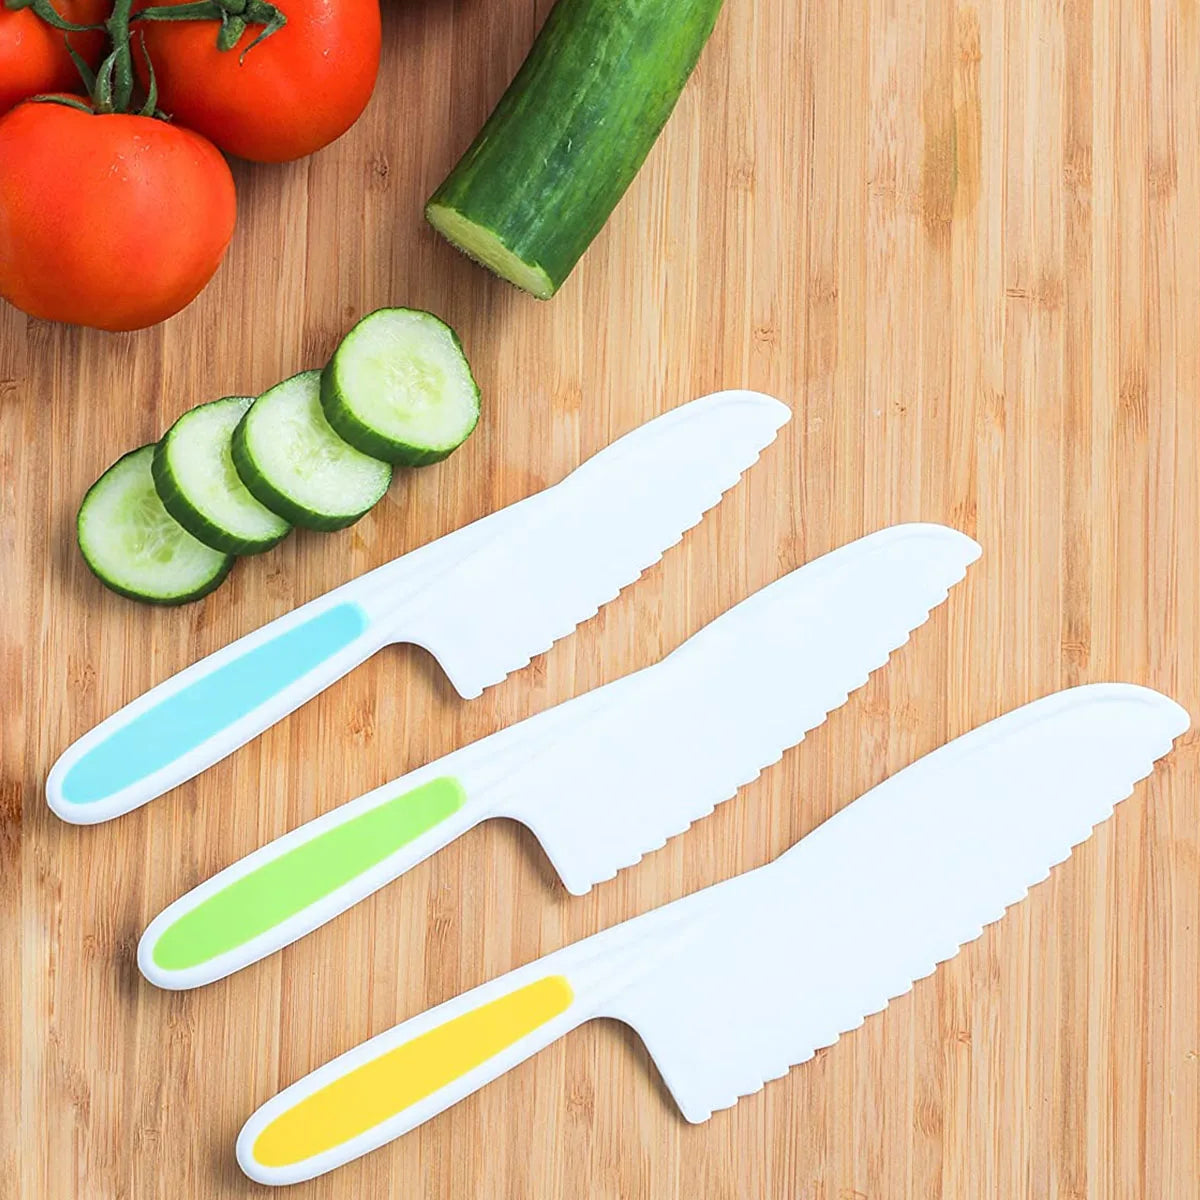 3Pcs Kids Safety Sawtooth Cutter Plastic Fruit Knife Childrens Chef for Bread Lettuce Toddler Cooking Knives Children DIY Tools